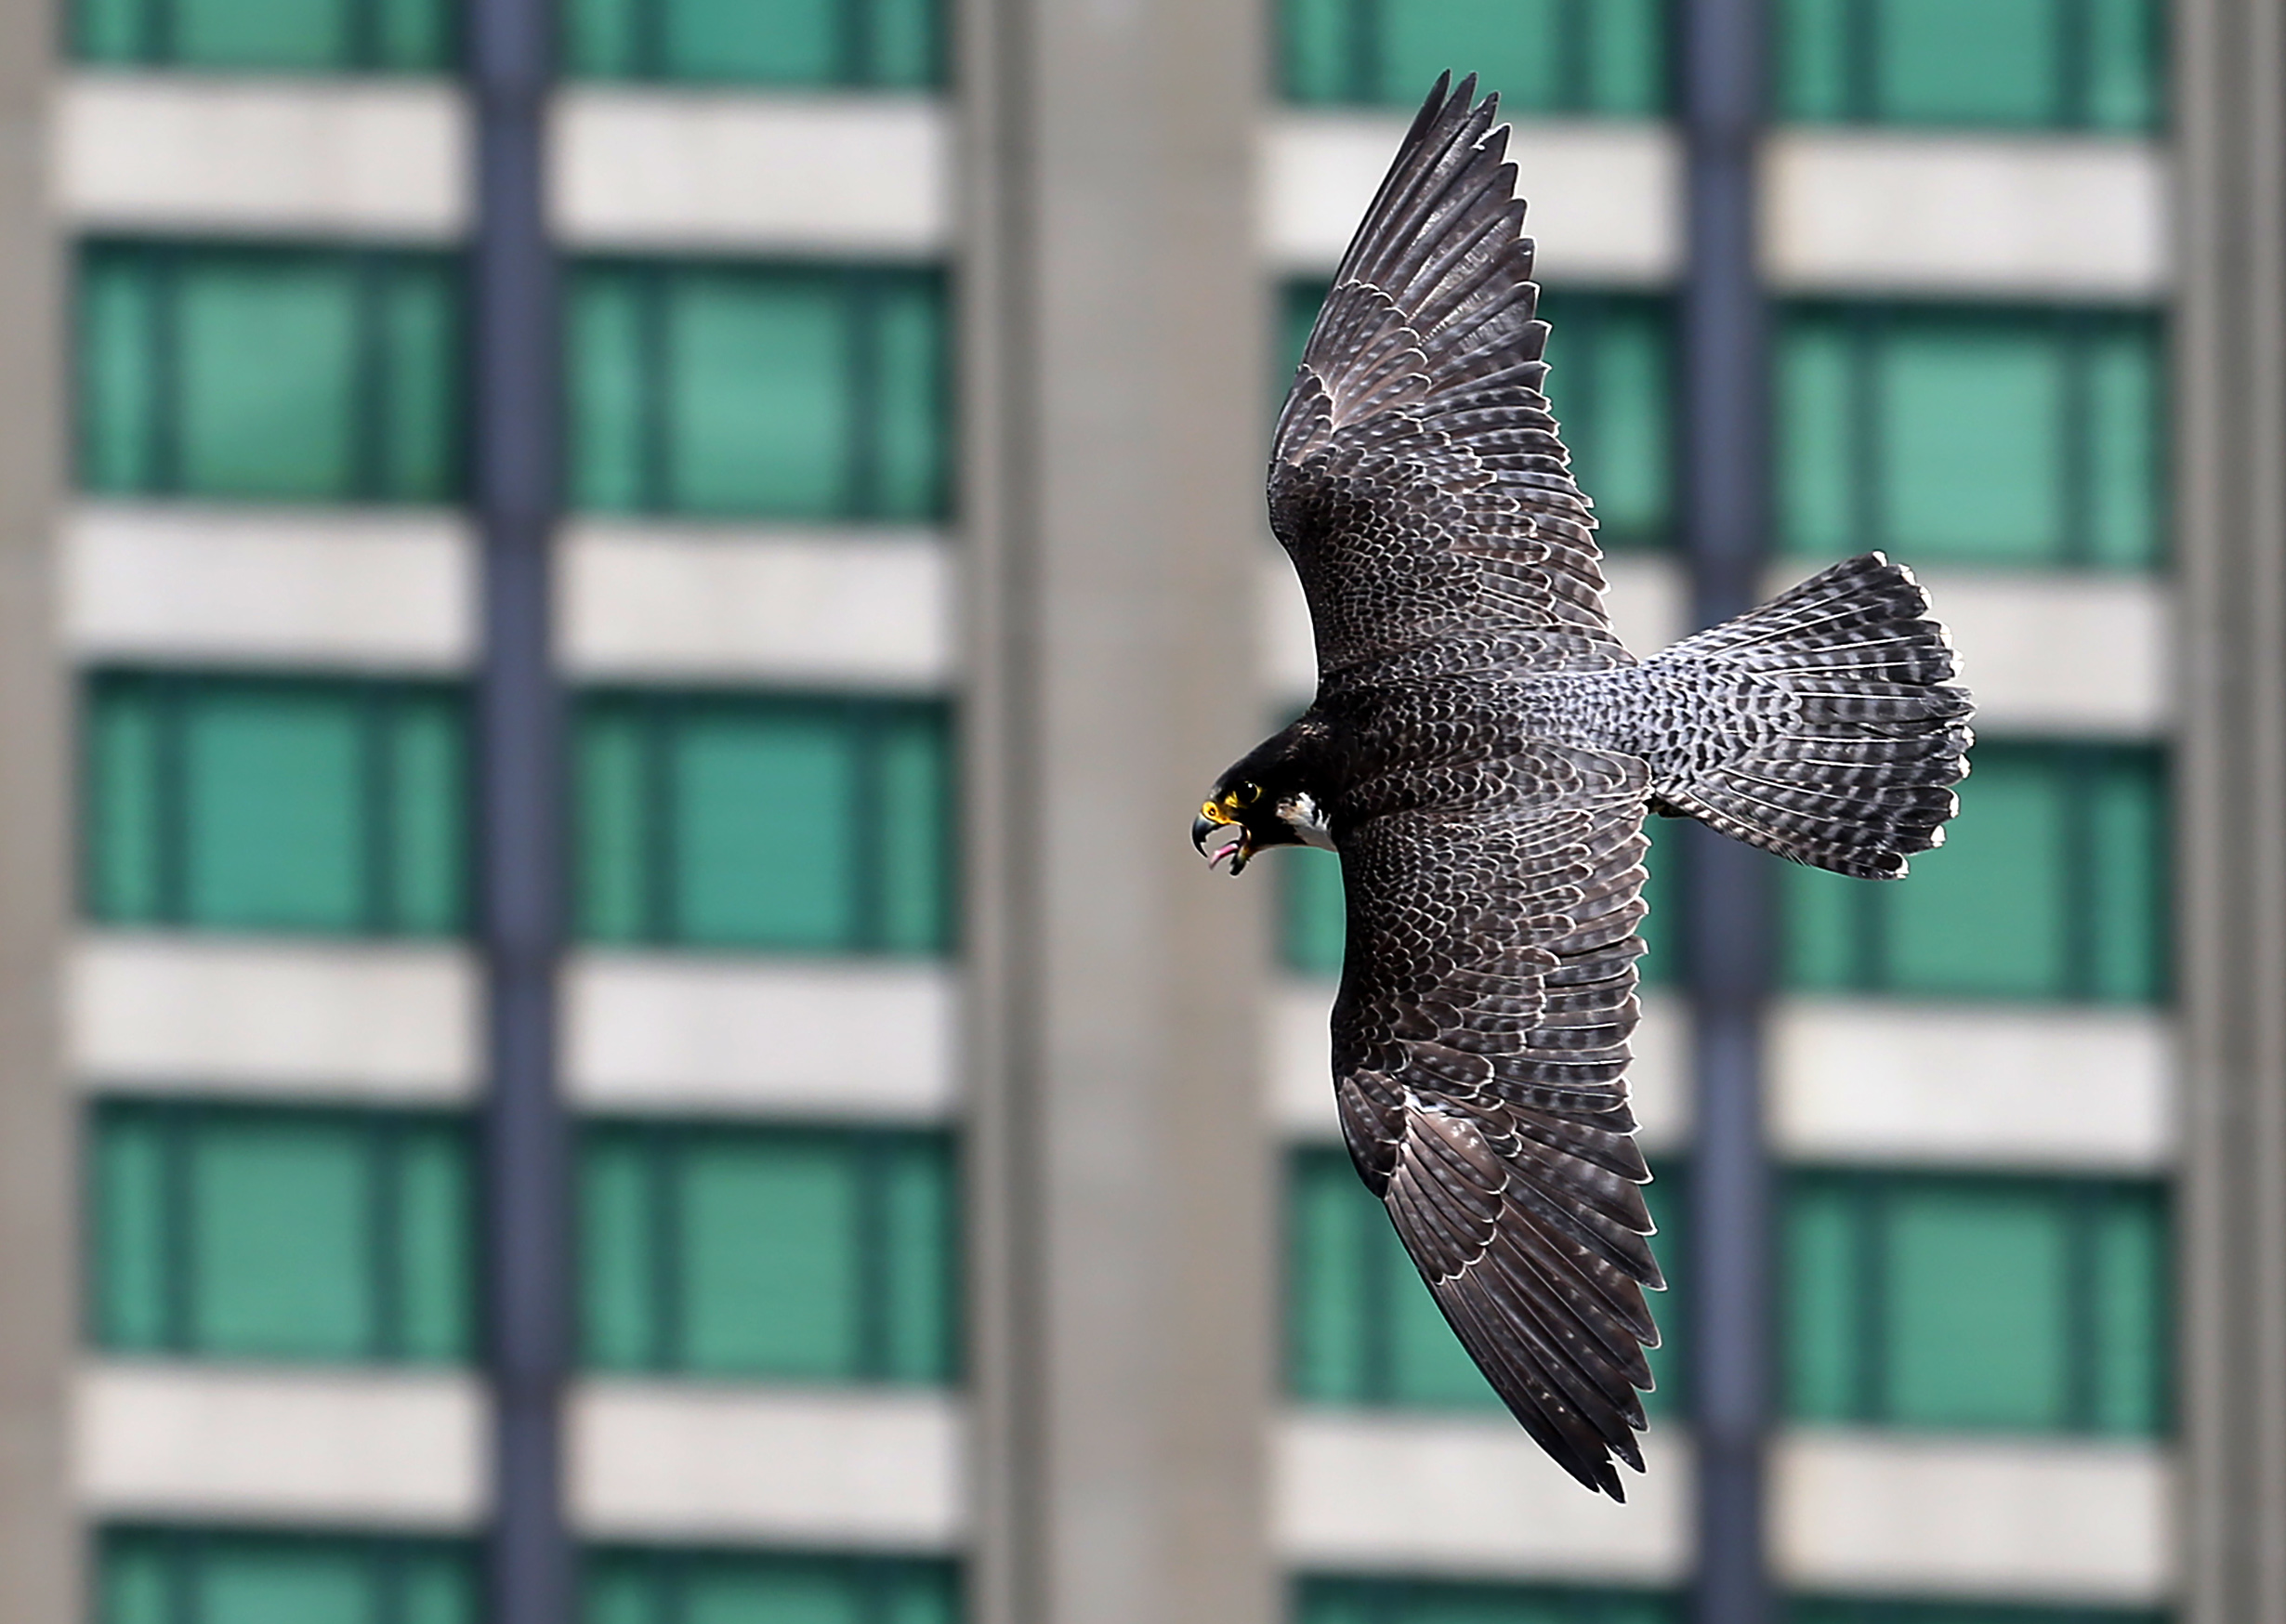 Peregrine falcons are back at Building. Watch live - The Boston